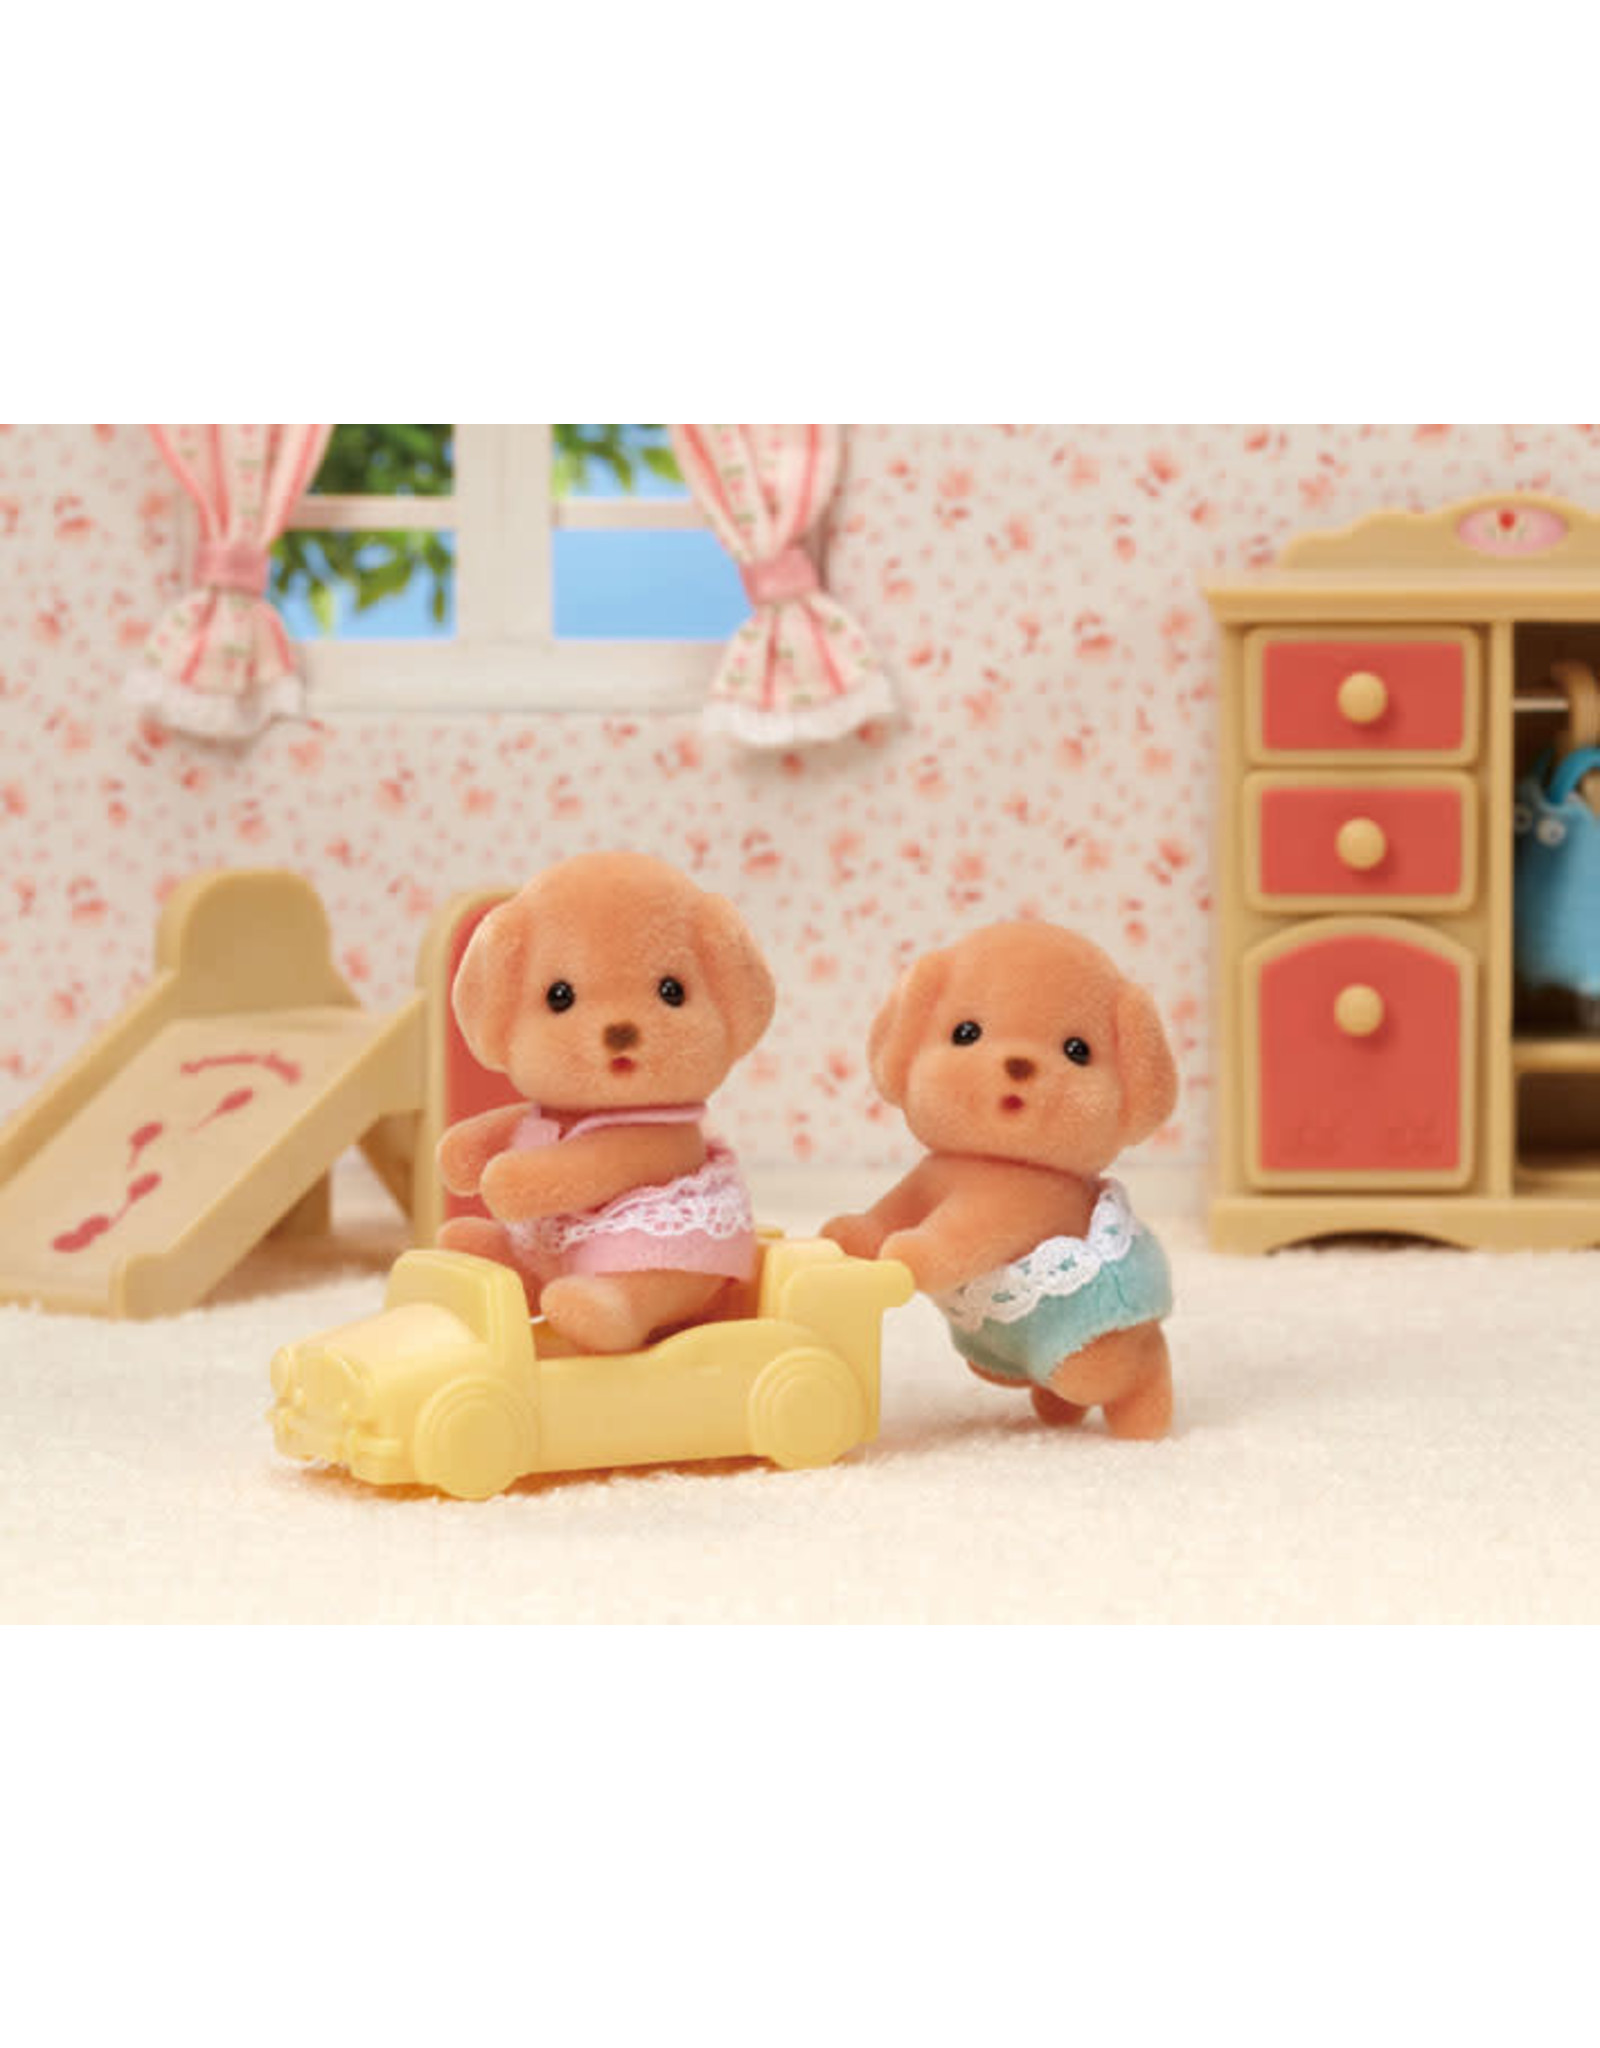 Calico Critters Toy Poodle Twins